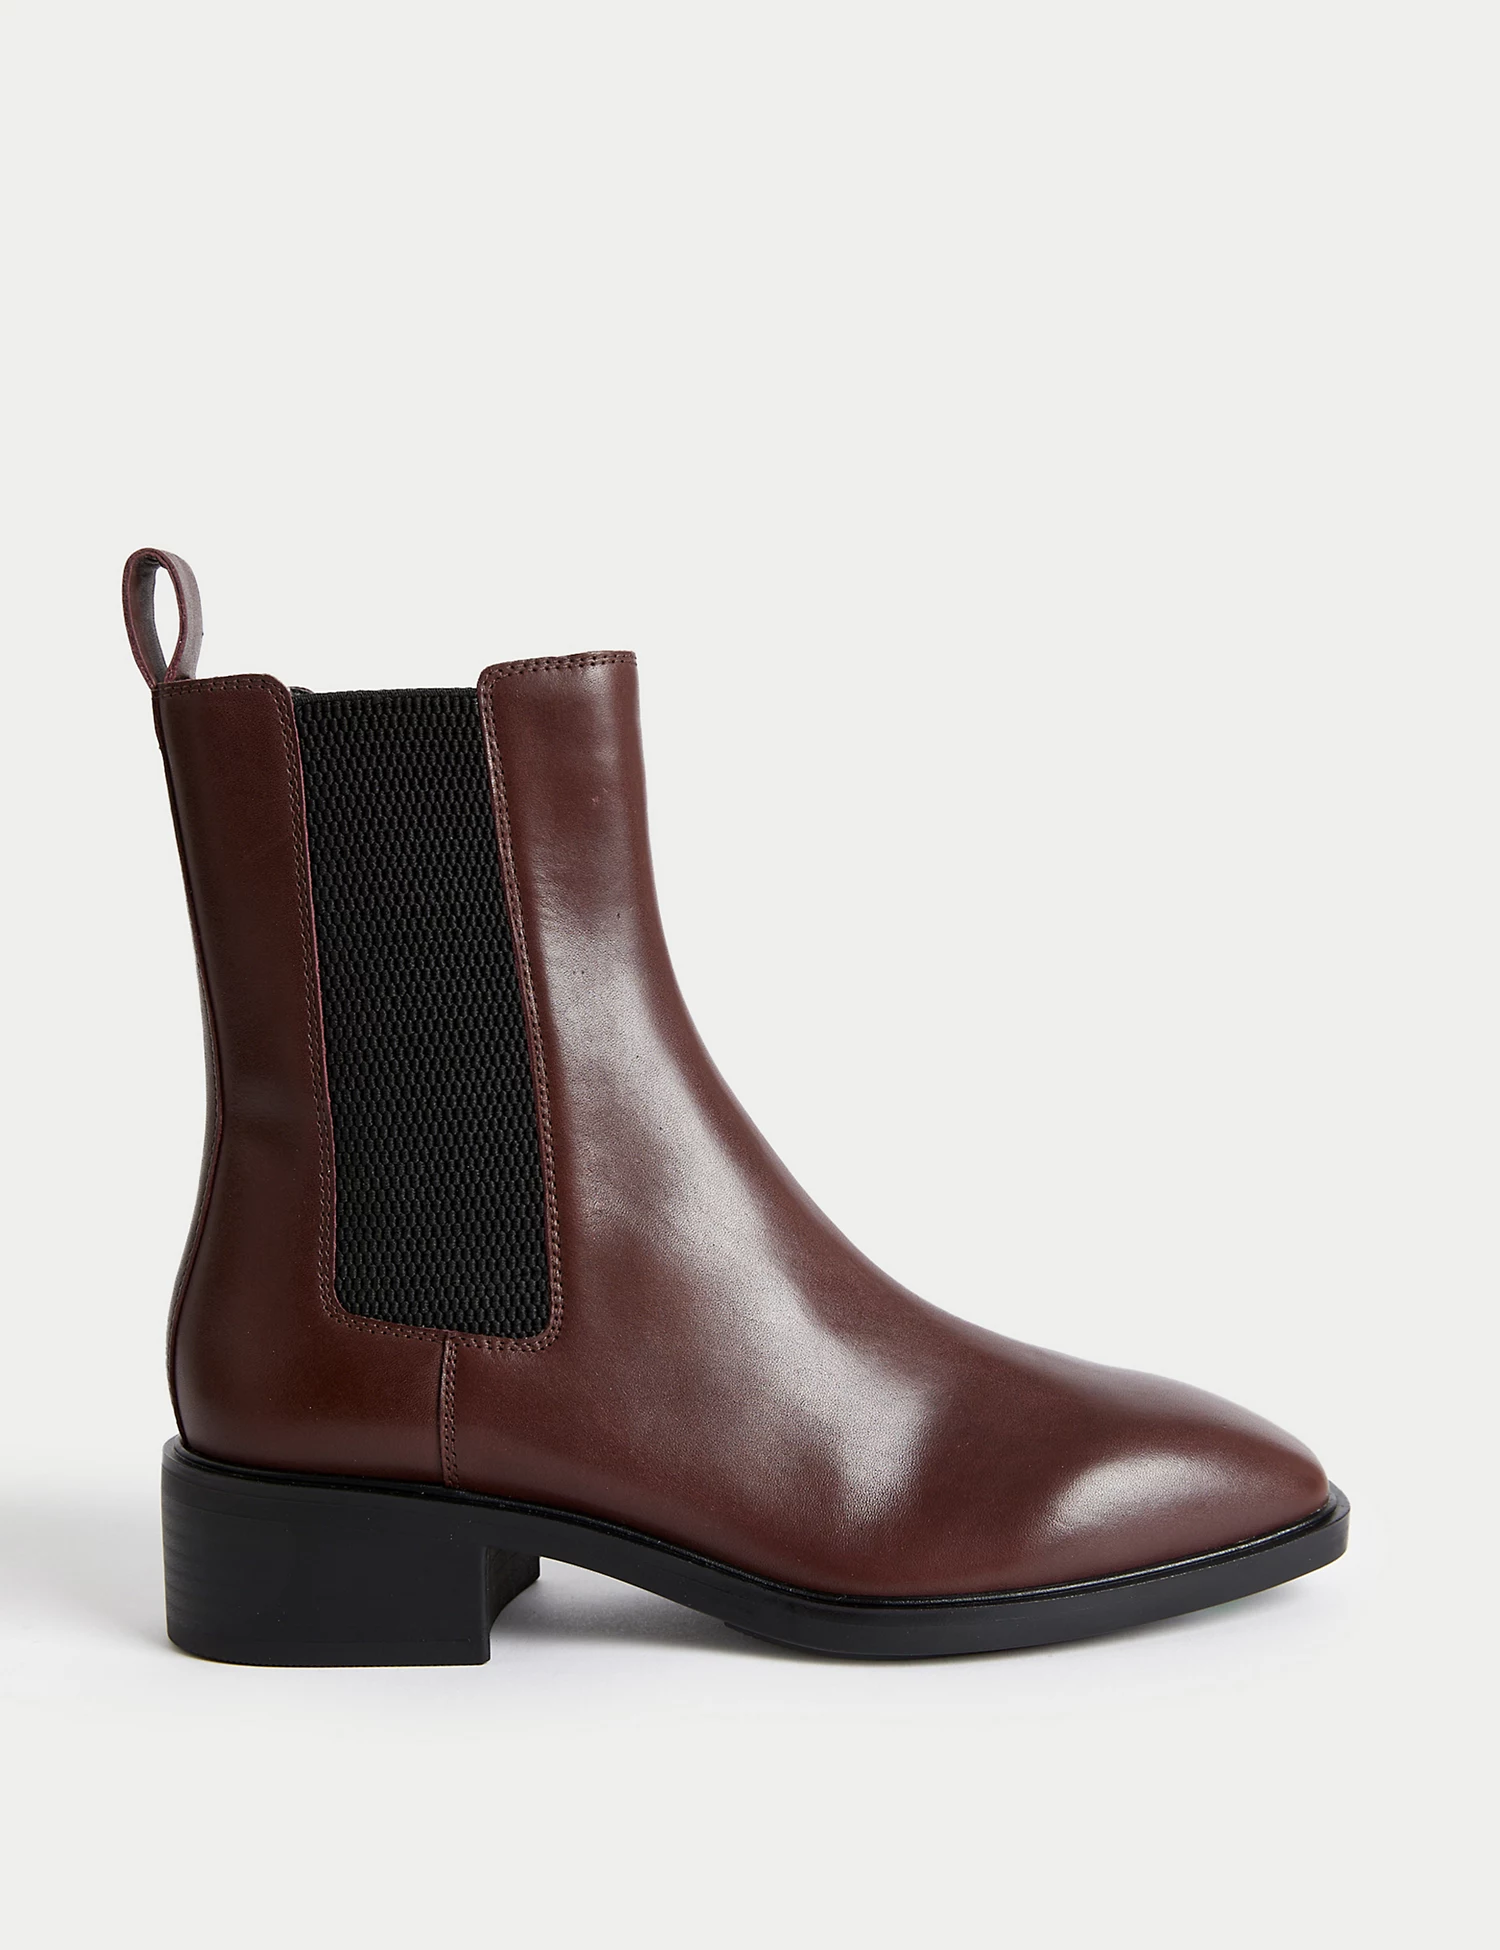 I Honestly Can't Resist Winter Boots from M&S—Here Are My Favourites